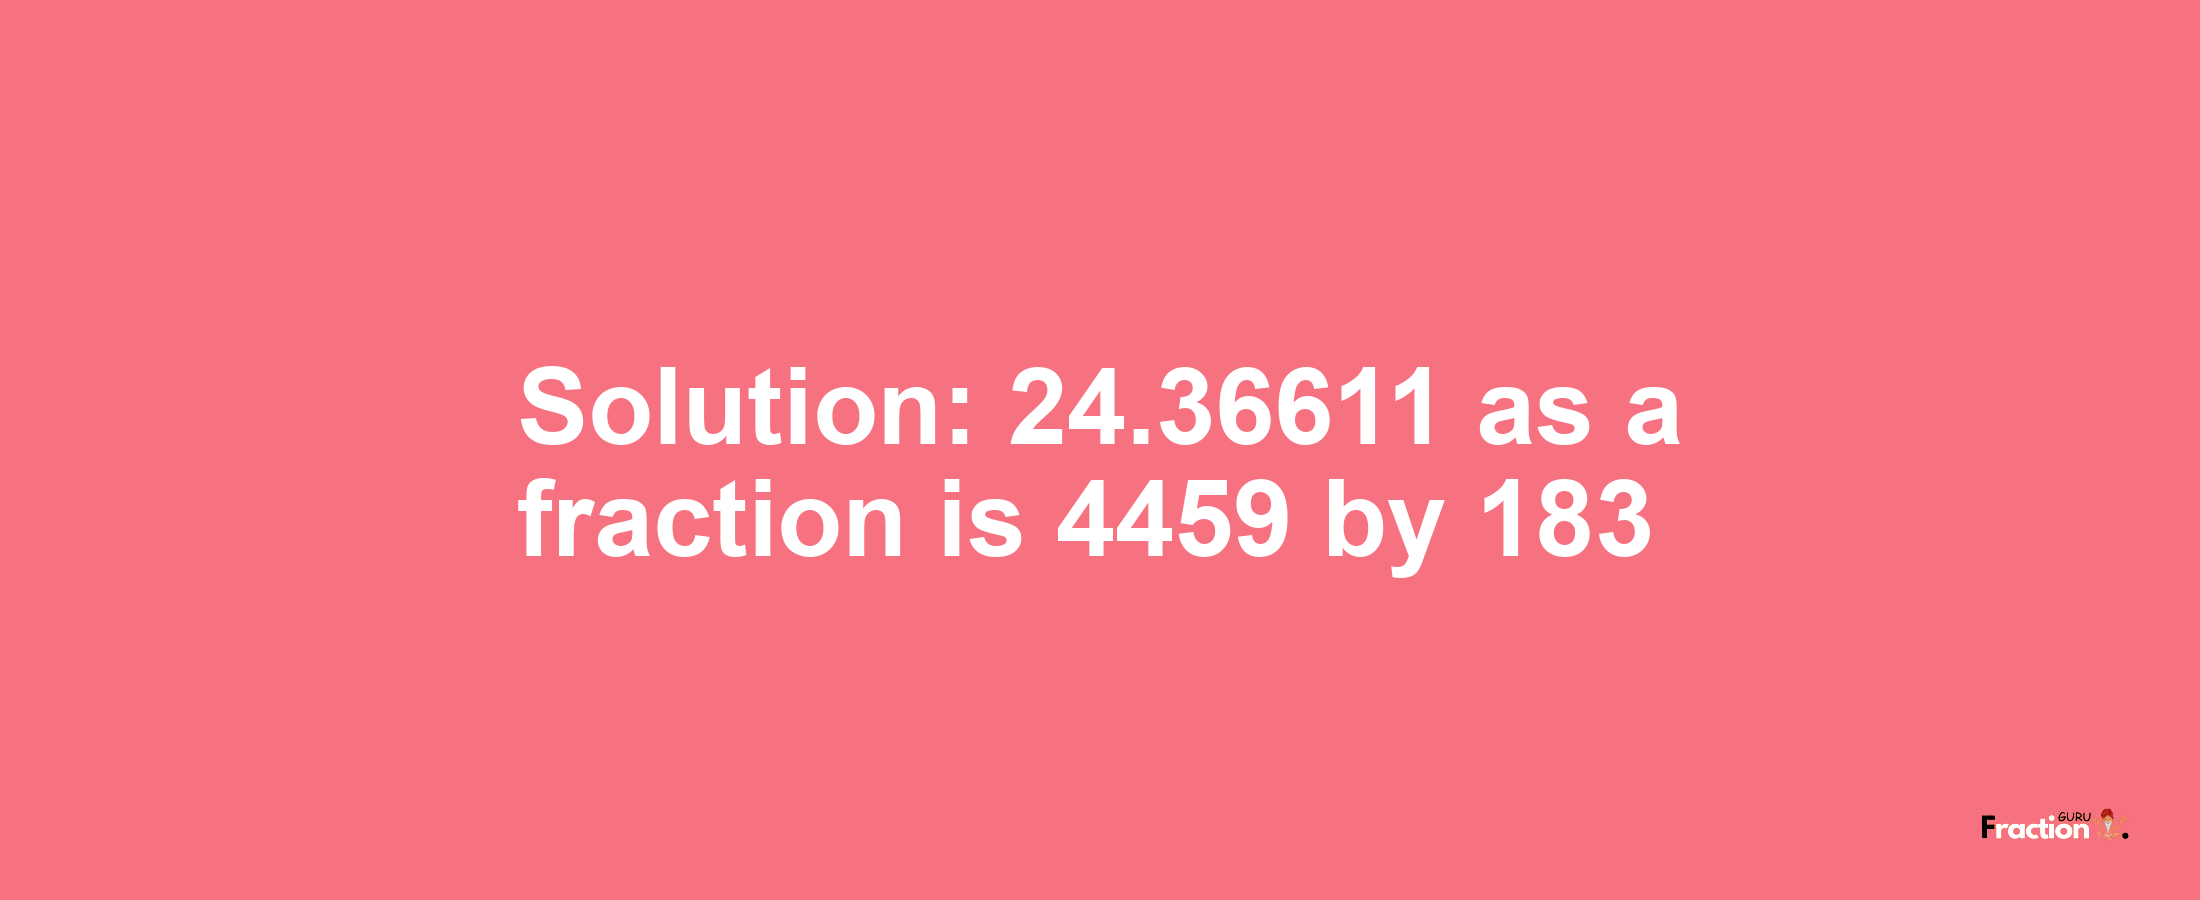 Solution:24.36611 as a fraction is 4459/183